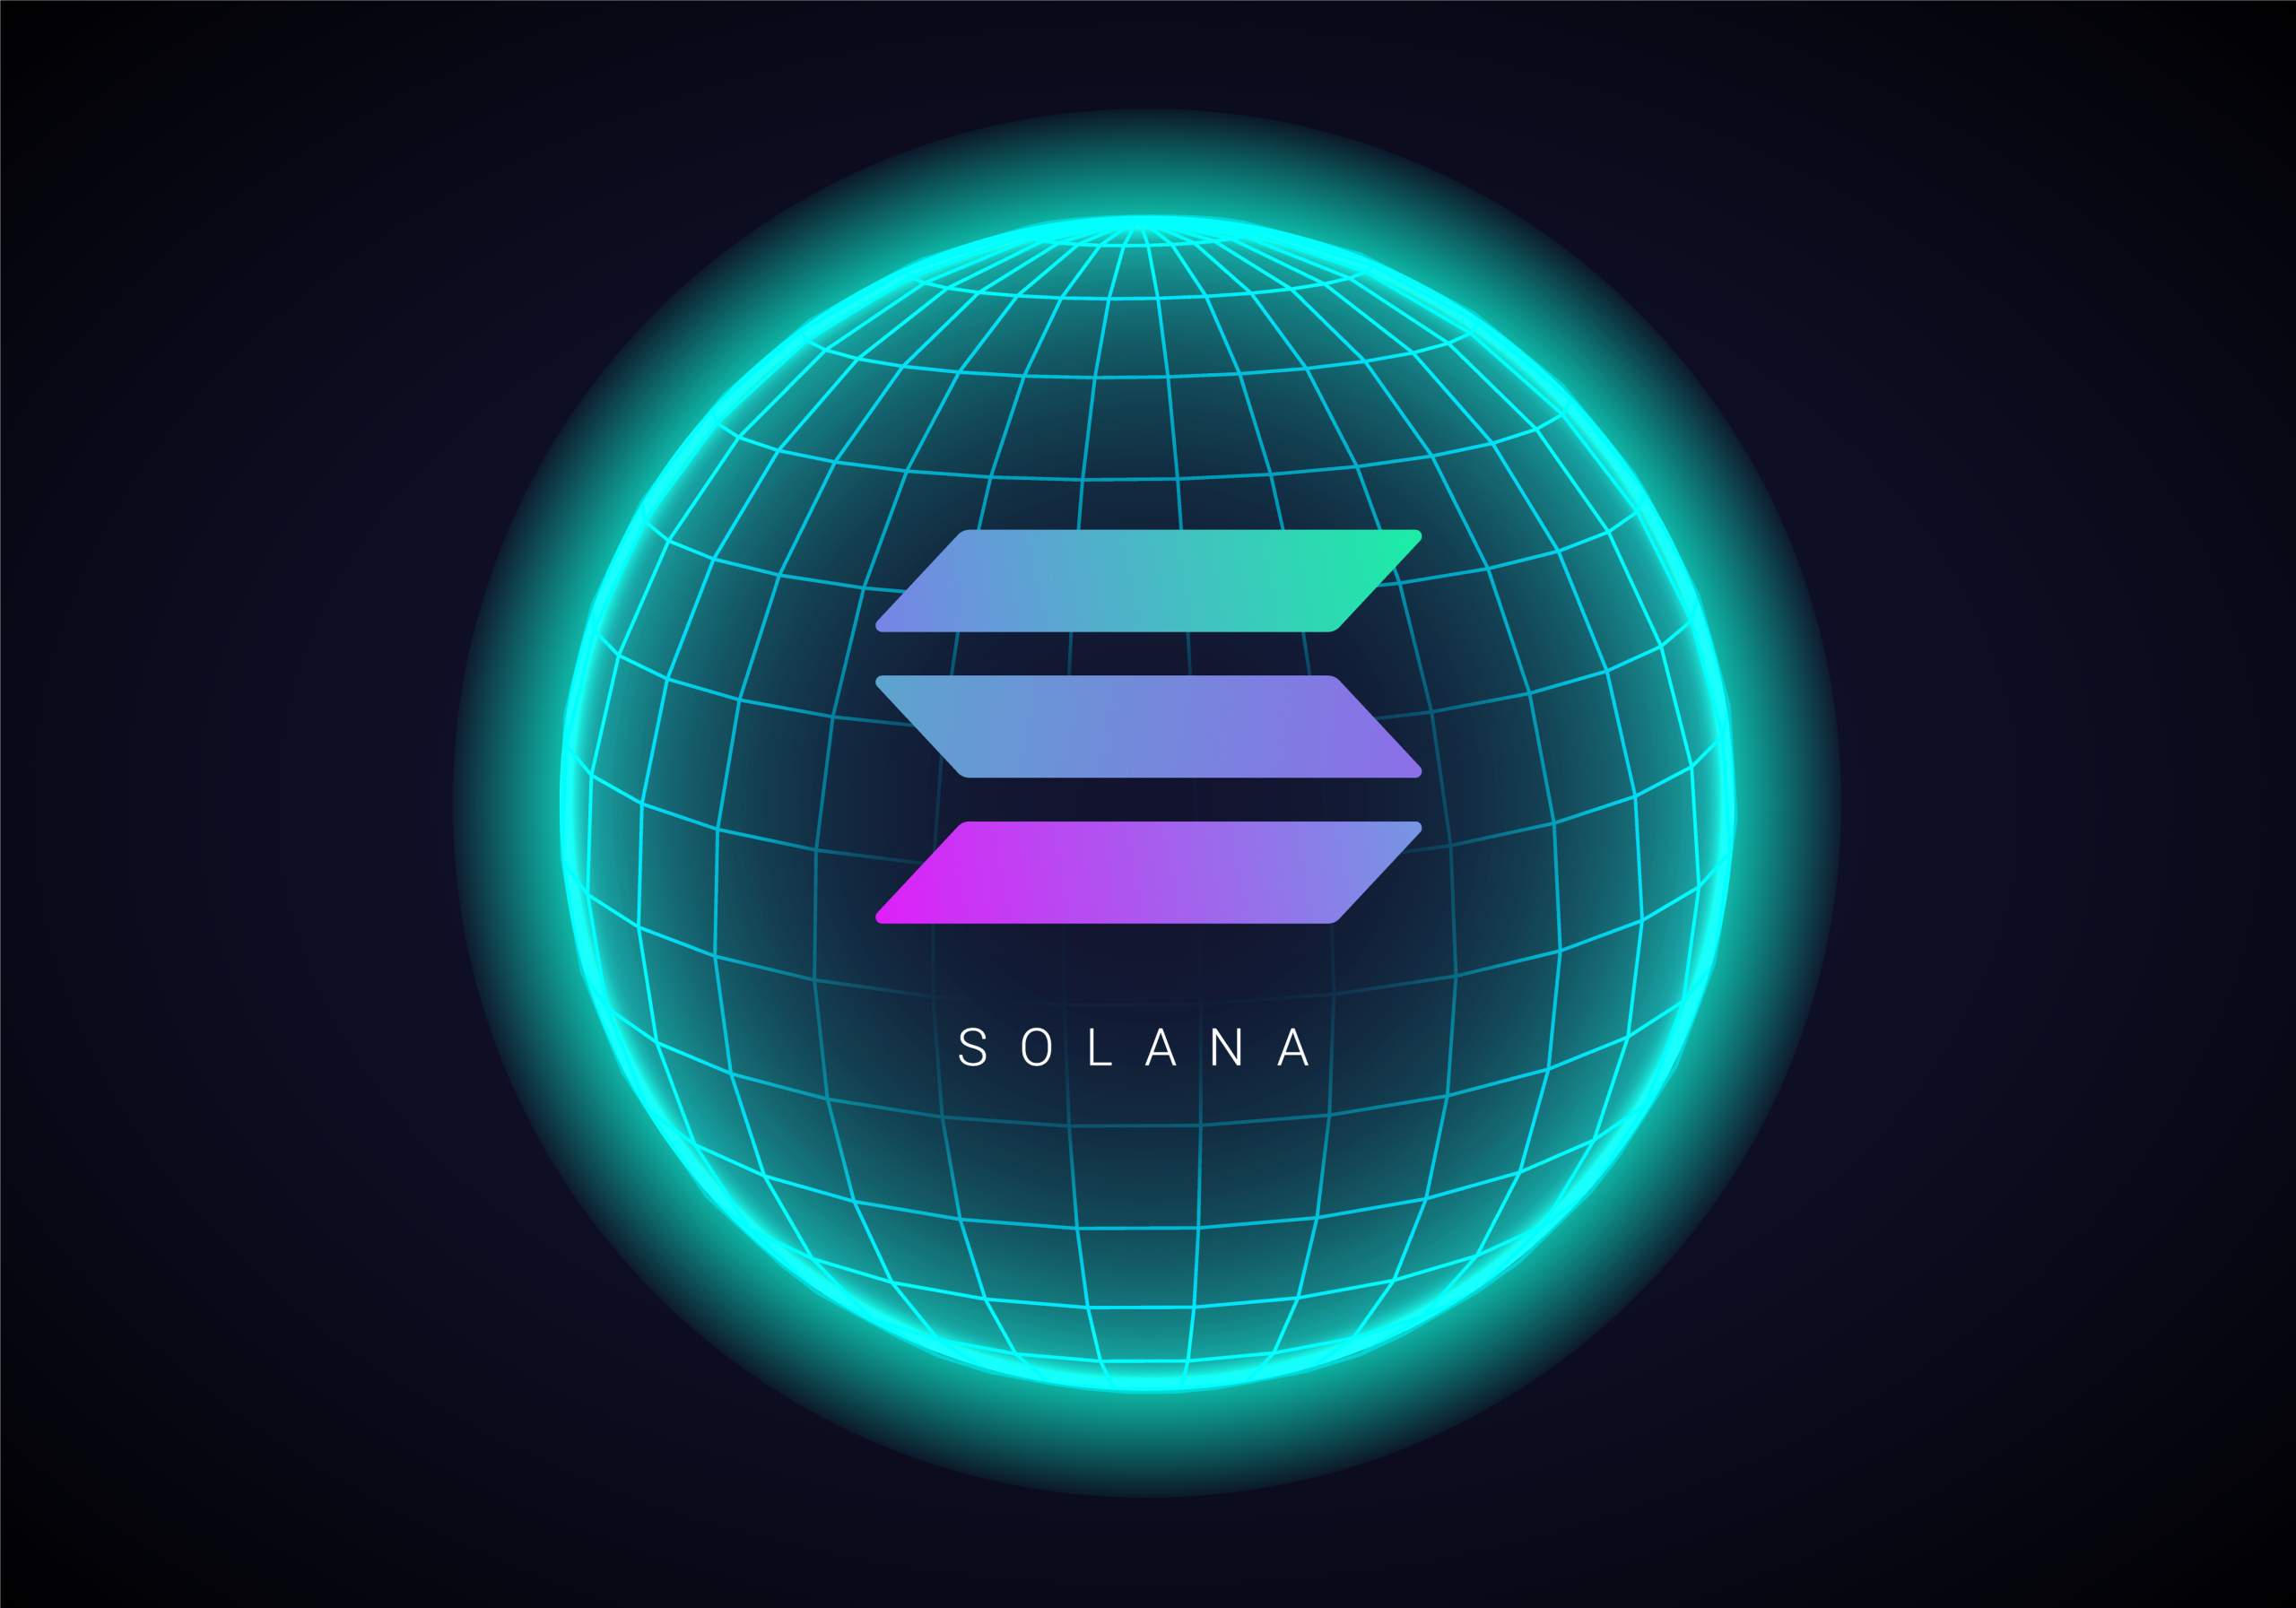 Solana continues to fall and now has a lower market cap than Litecoin
